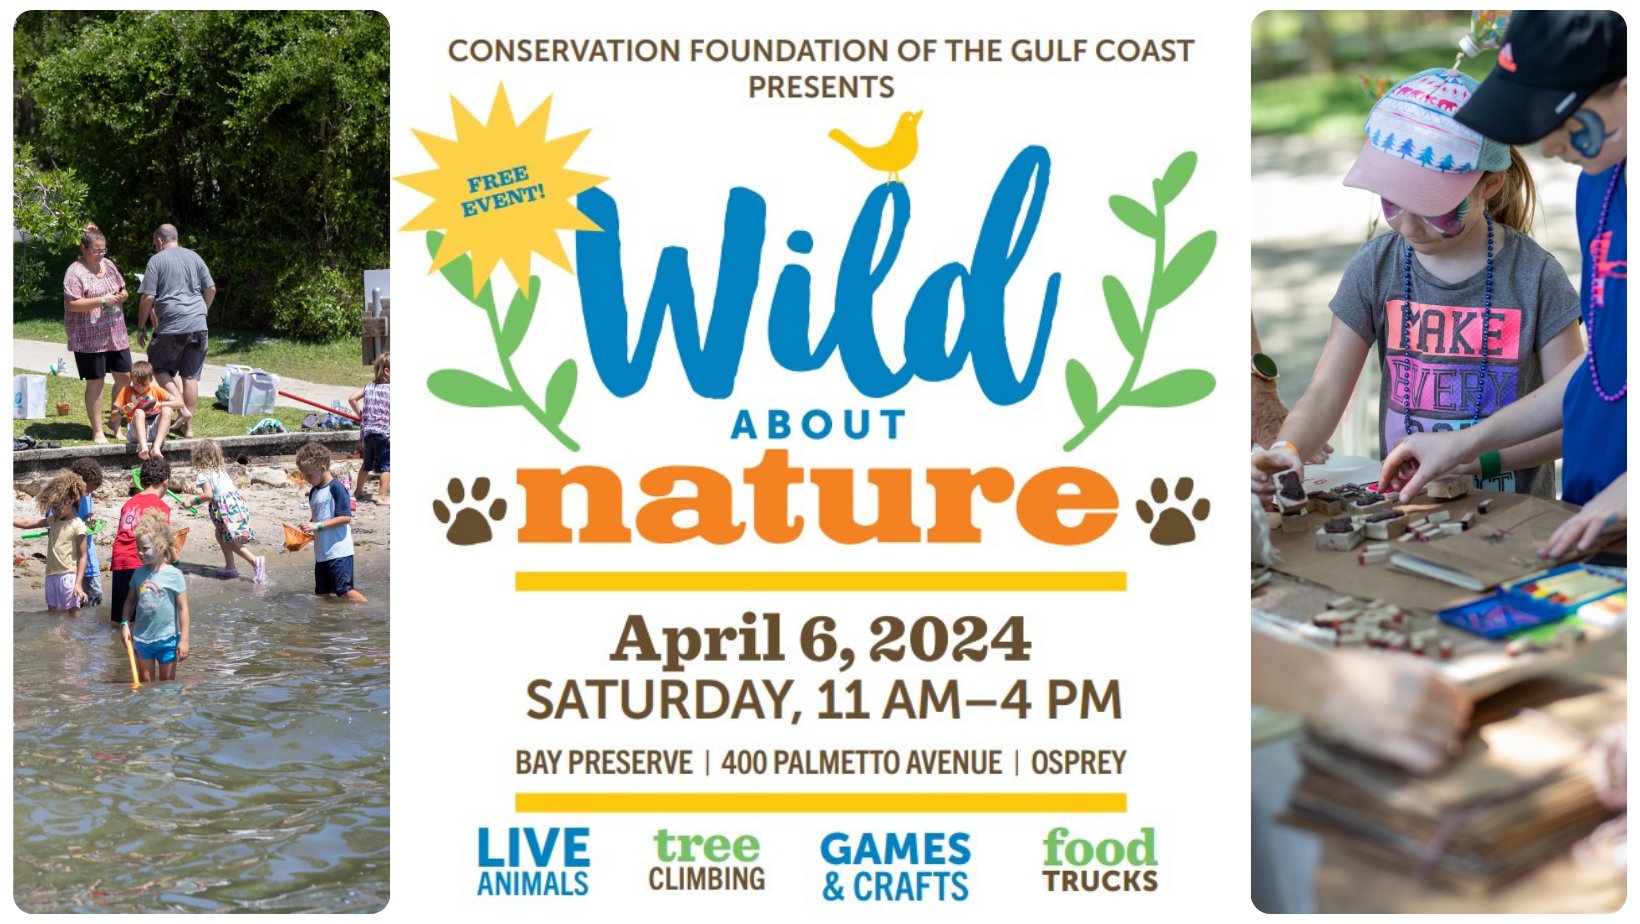 This graphic is for the Wild About Nature Festival.